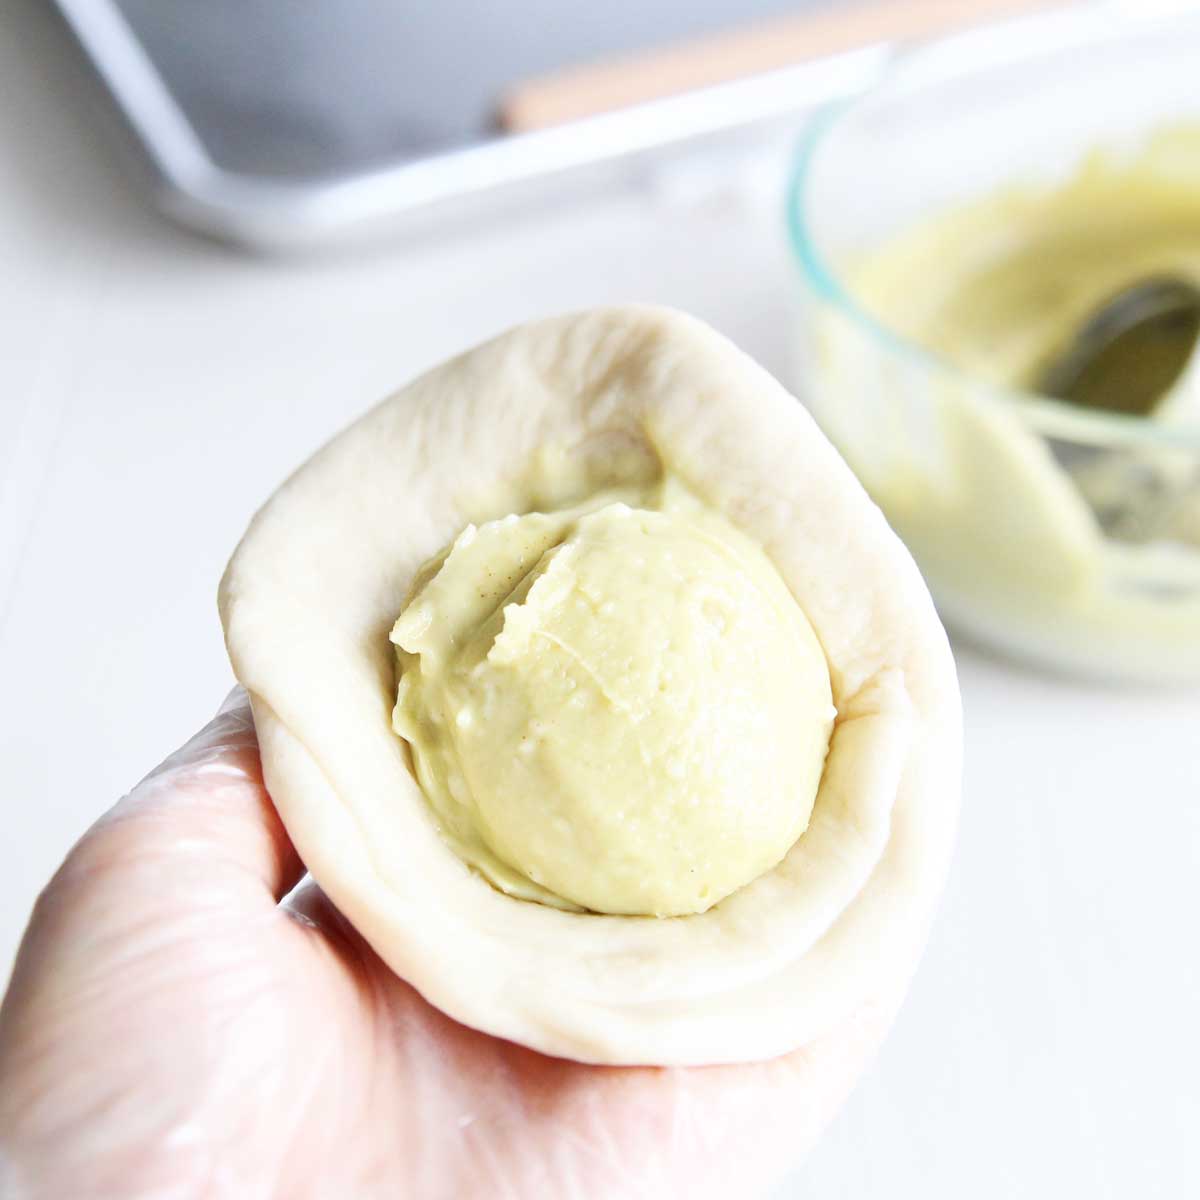 Coconut Cream Steamed Buns with a Vegan Pistachio Custard Filling - Coconut Cream Steamed Buns